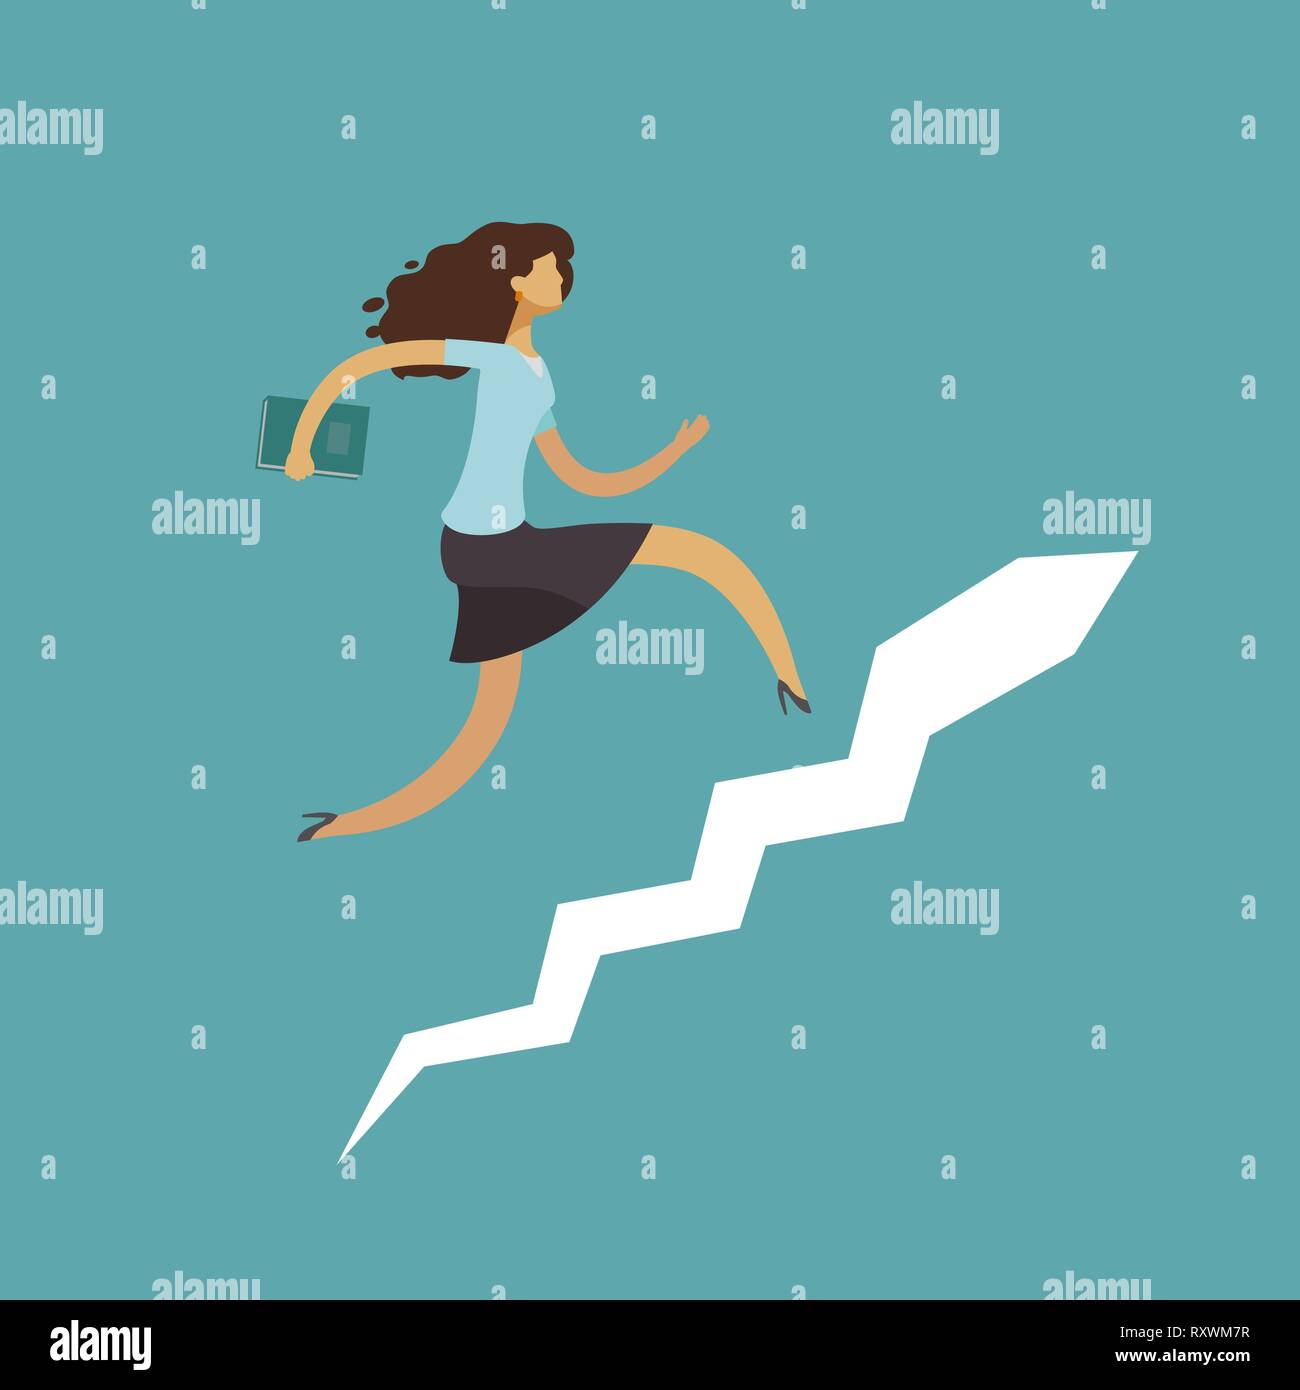 Businesswoman running up stairway. Career ladder, success concept. Business vector illustration Stock Vector